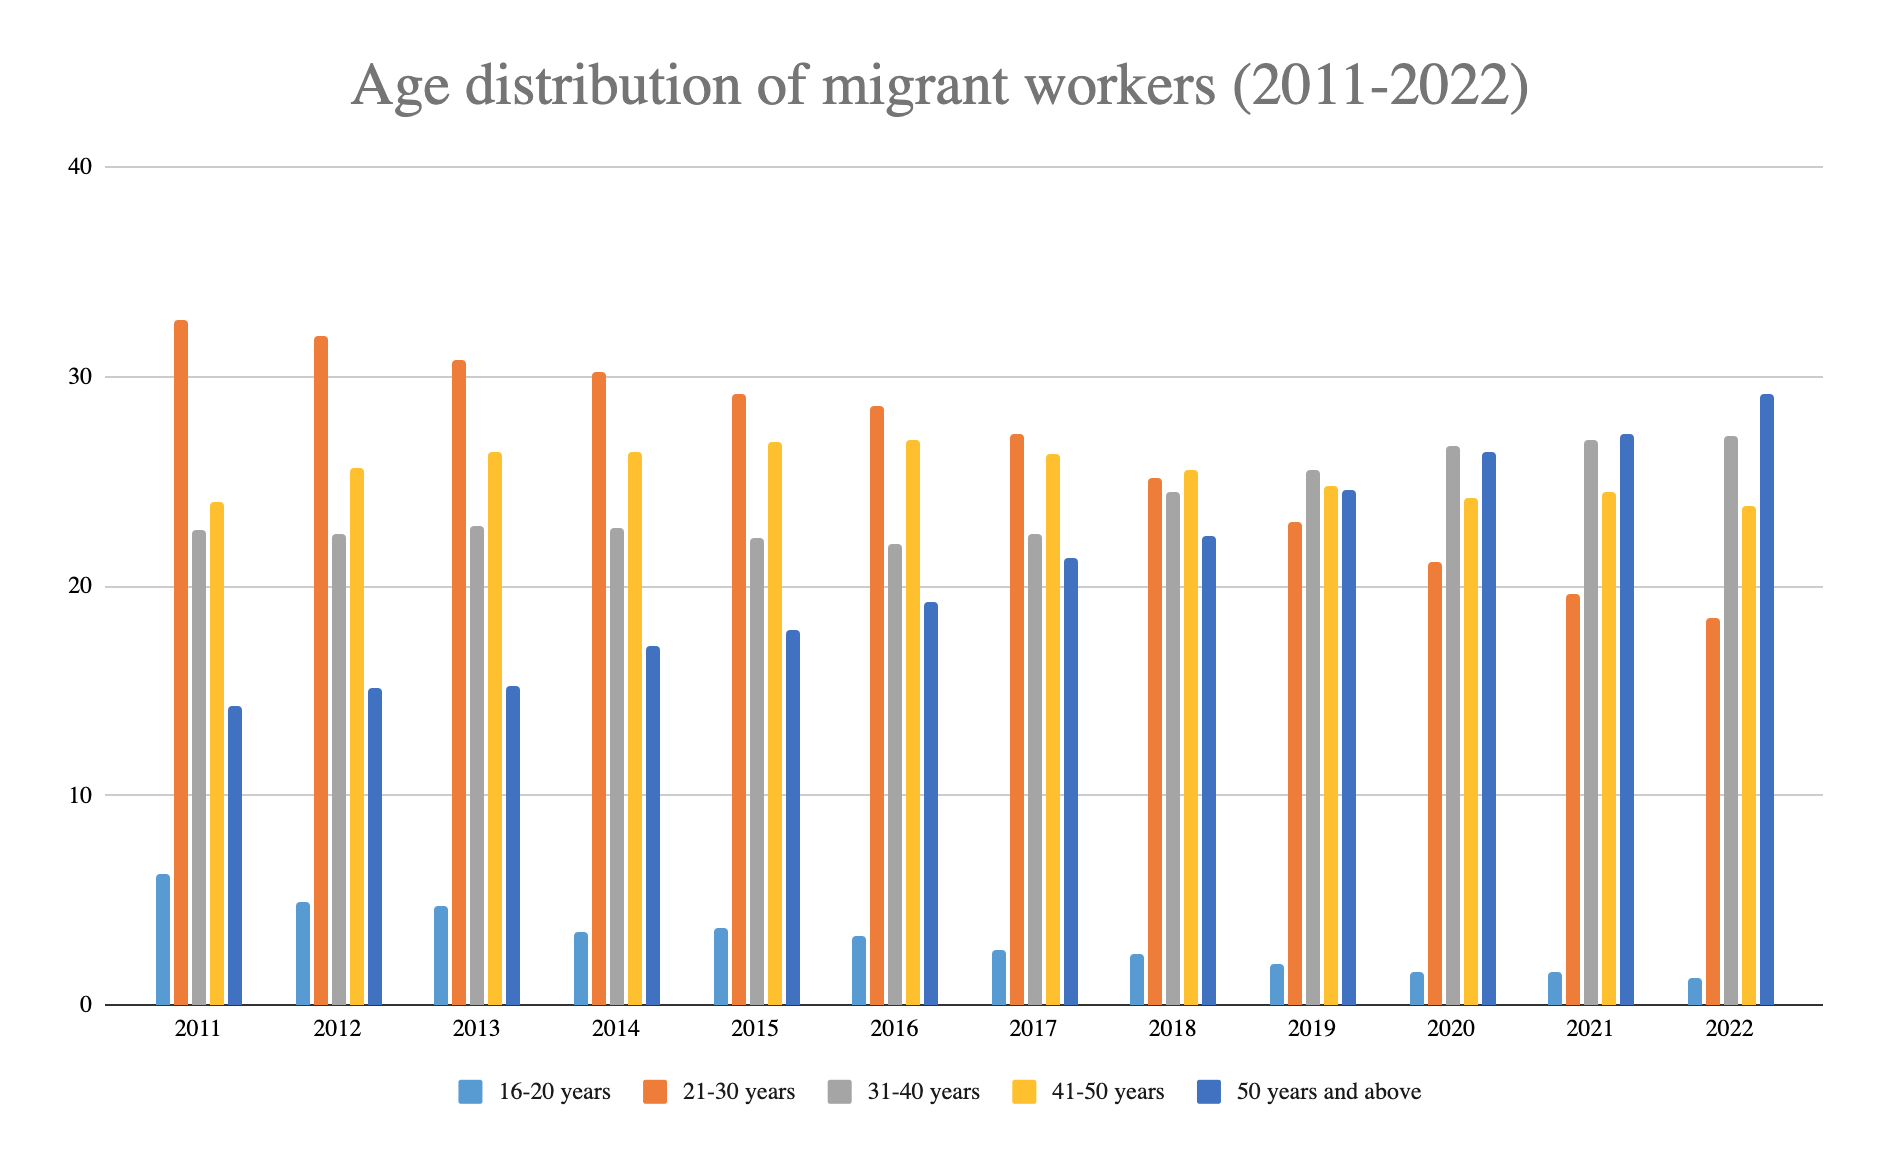 A CLB graph shows the age distribution of migrant workers from 2011 to 2022 according to official statistics